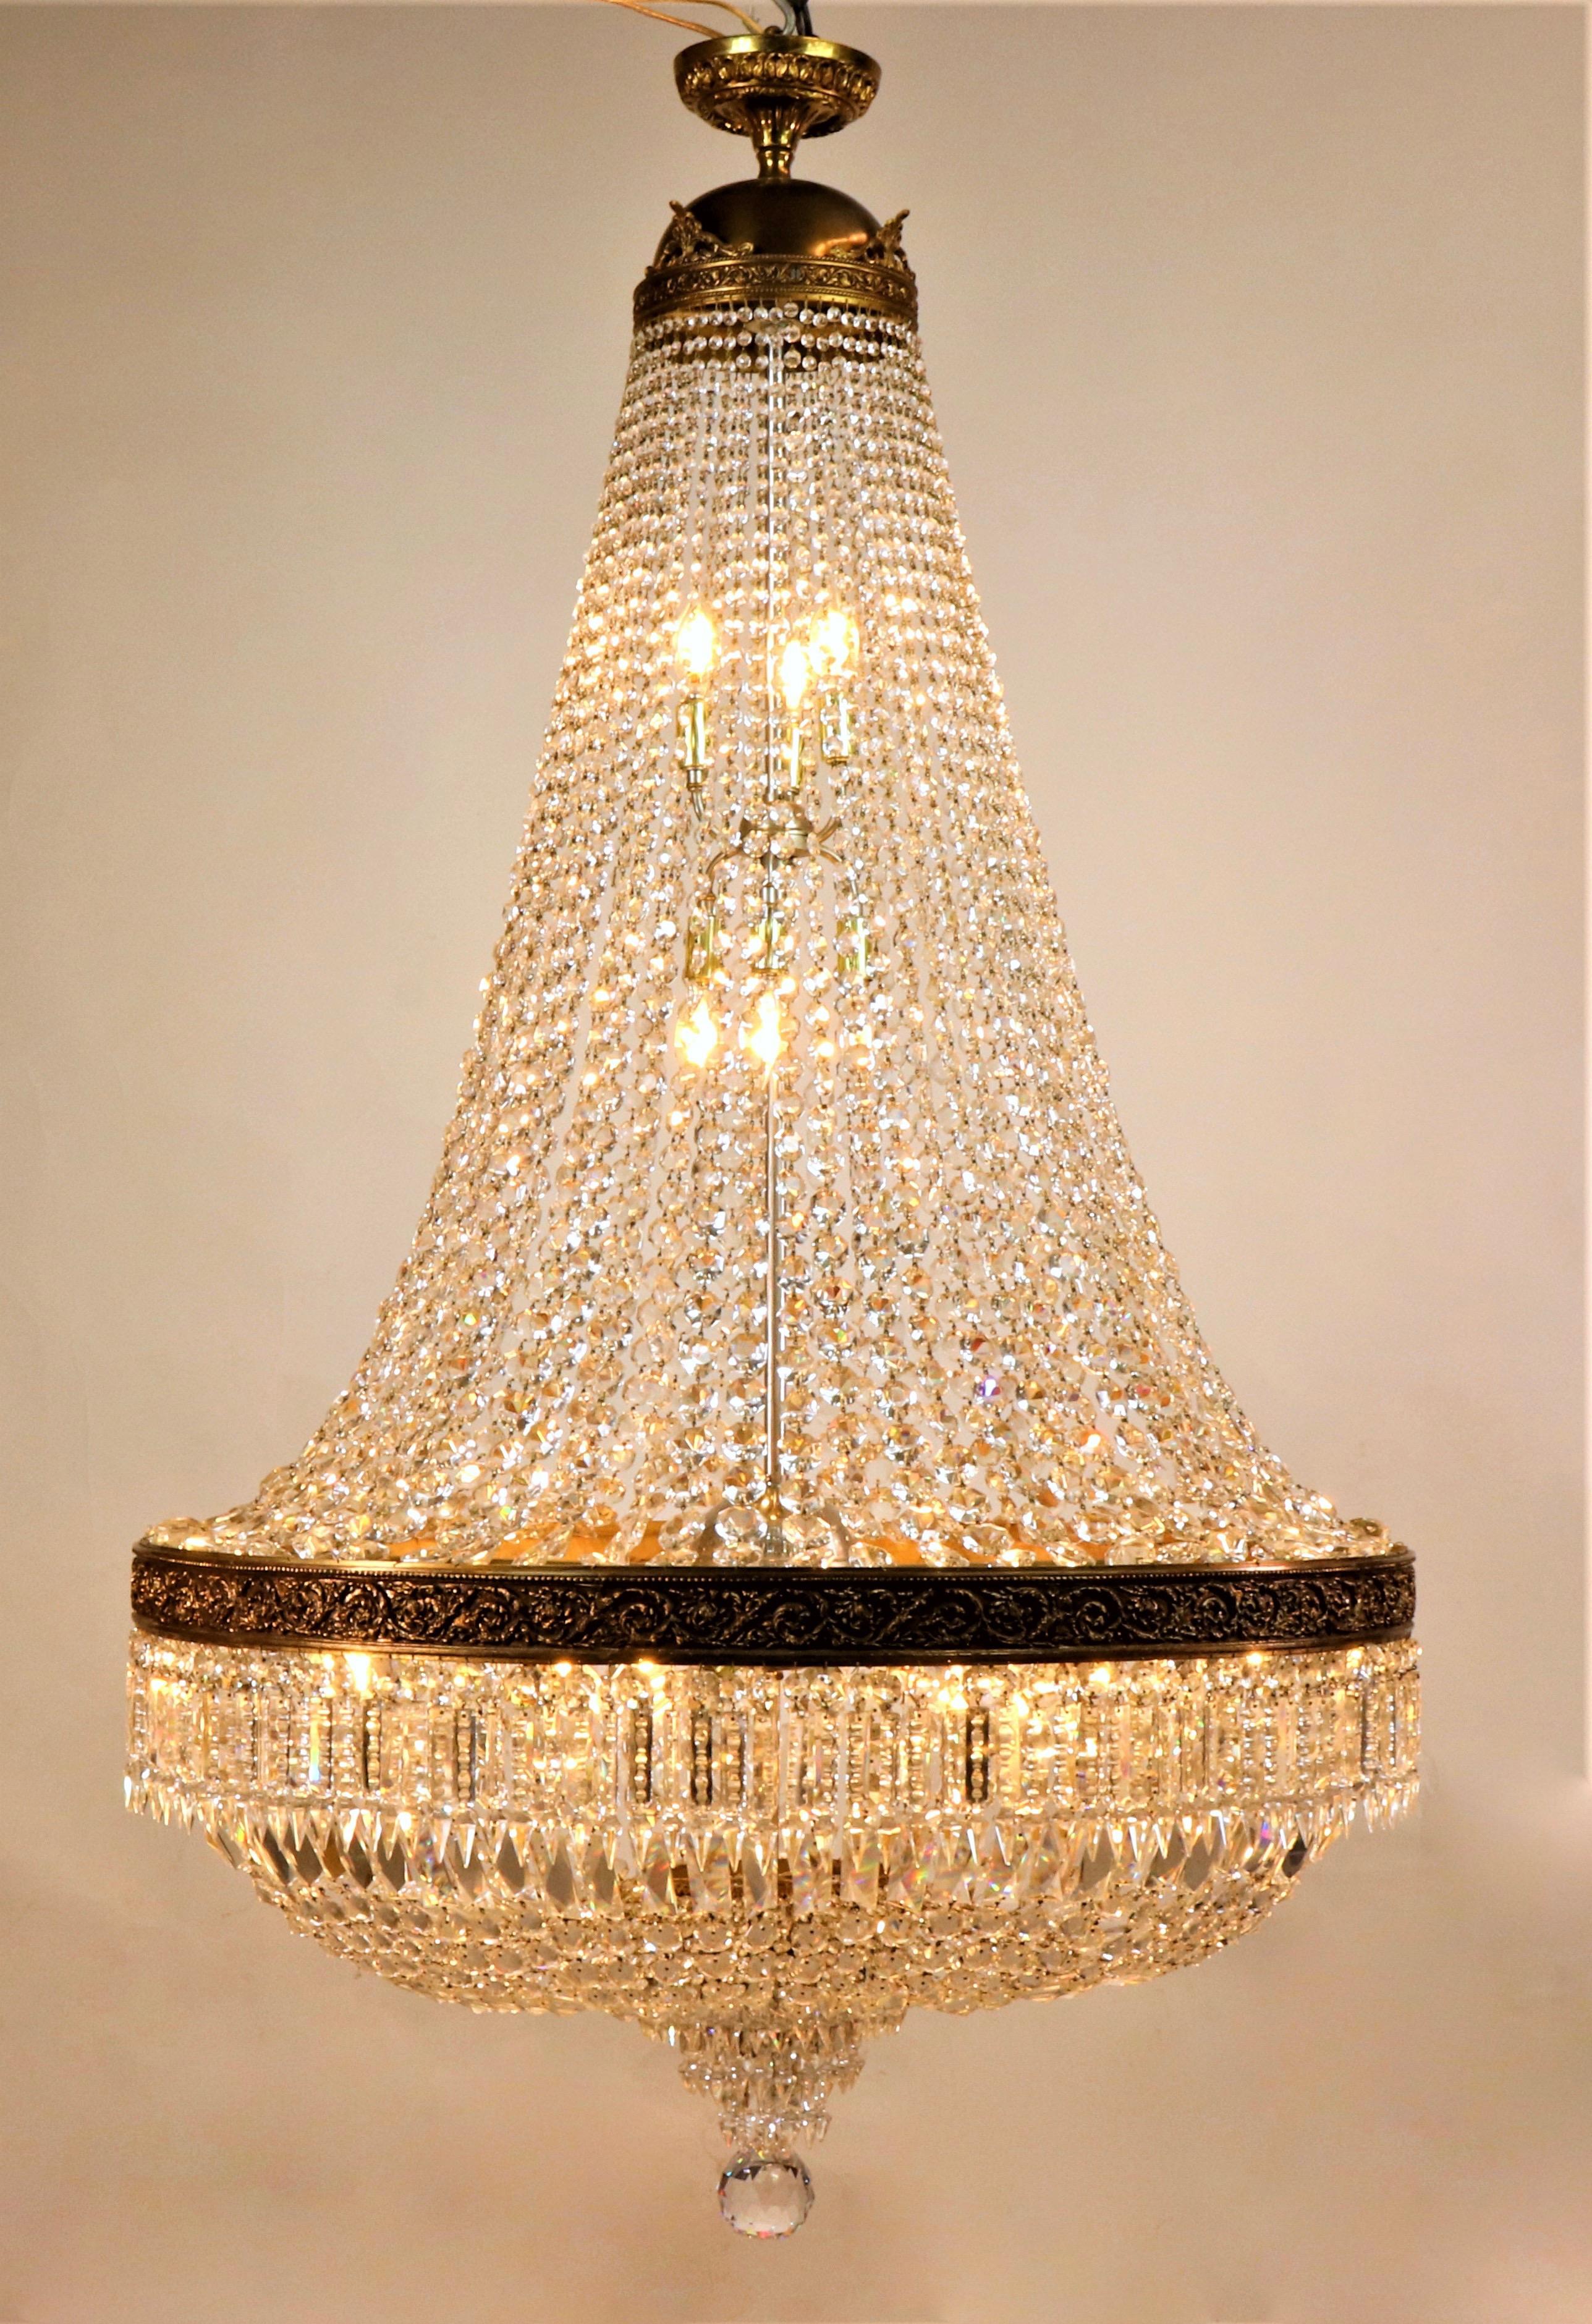 This large-scale circa 1920 Italian Empire style brass, bronze, and crystal chandelier has twenty-two lights for a room requiring substantial illumination. With intricately carved neoclassical details of a brass palmette motif crown with a bronze